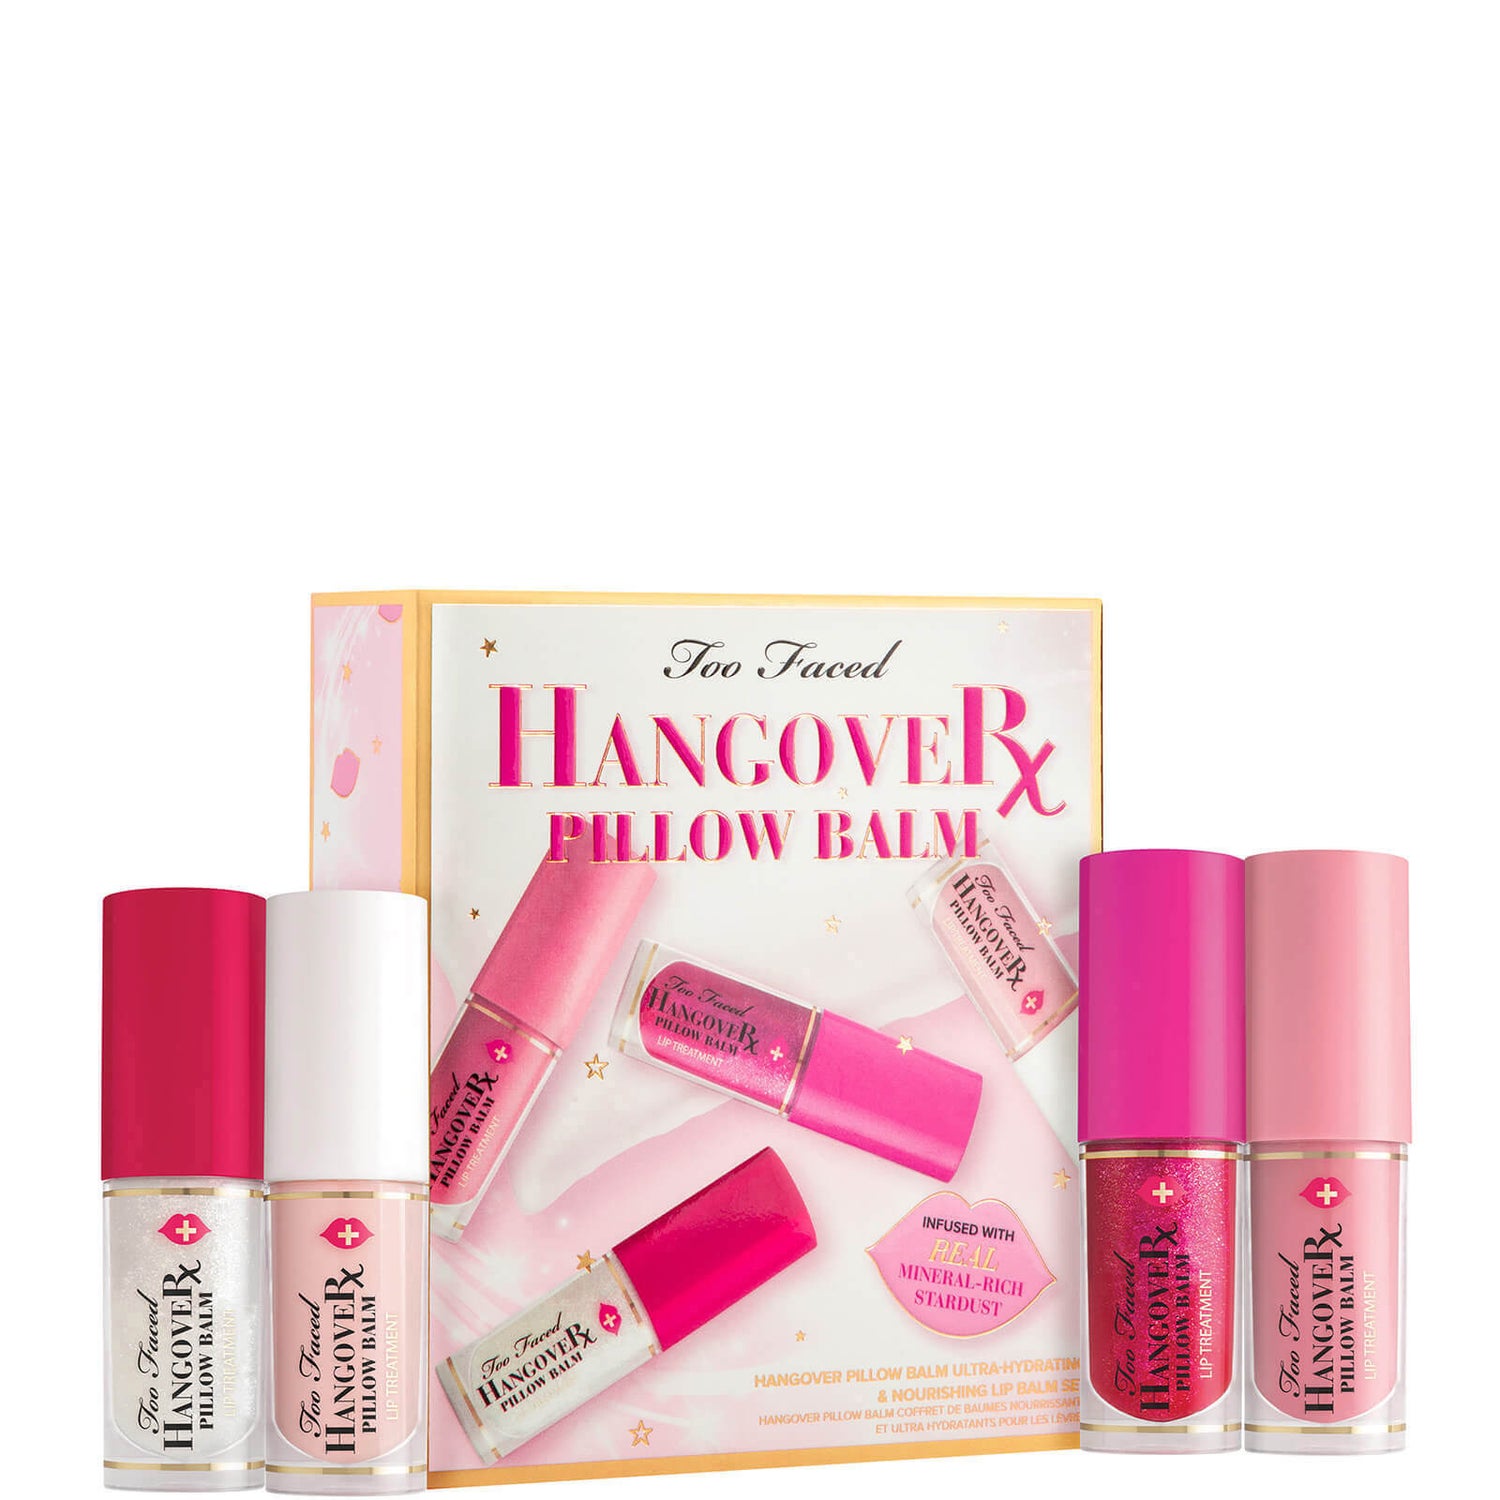 Too Faced Limited Edition Hangover Pillow Balm Lip Treatment Set (Worth £48.00)